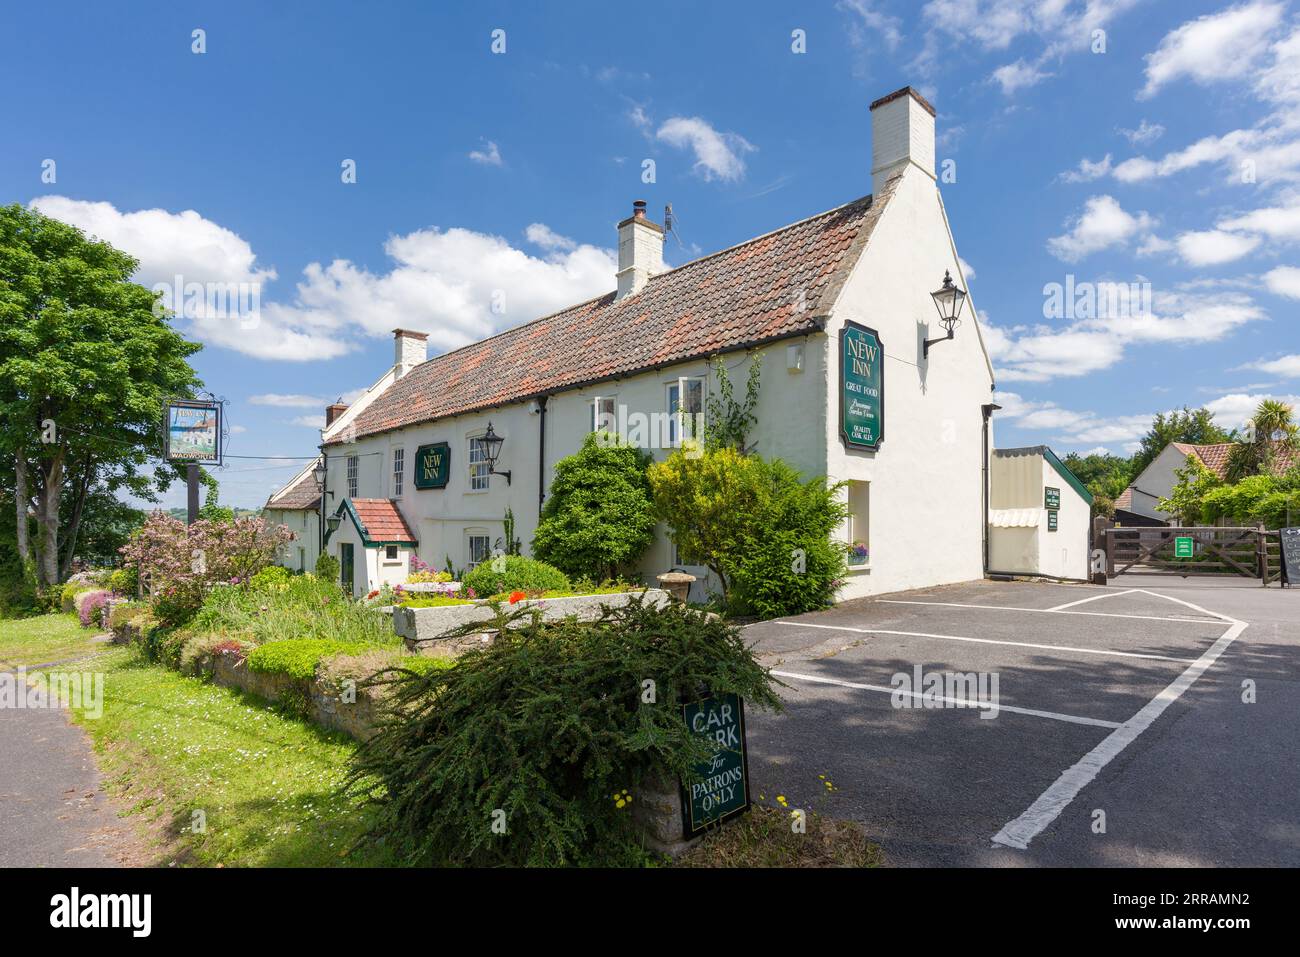 The New Inn public house in the village of Blagdon in the Mendip Hills North Devon Coast National Landscape, North Somerset, England. Stock Photo